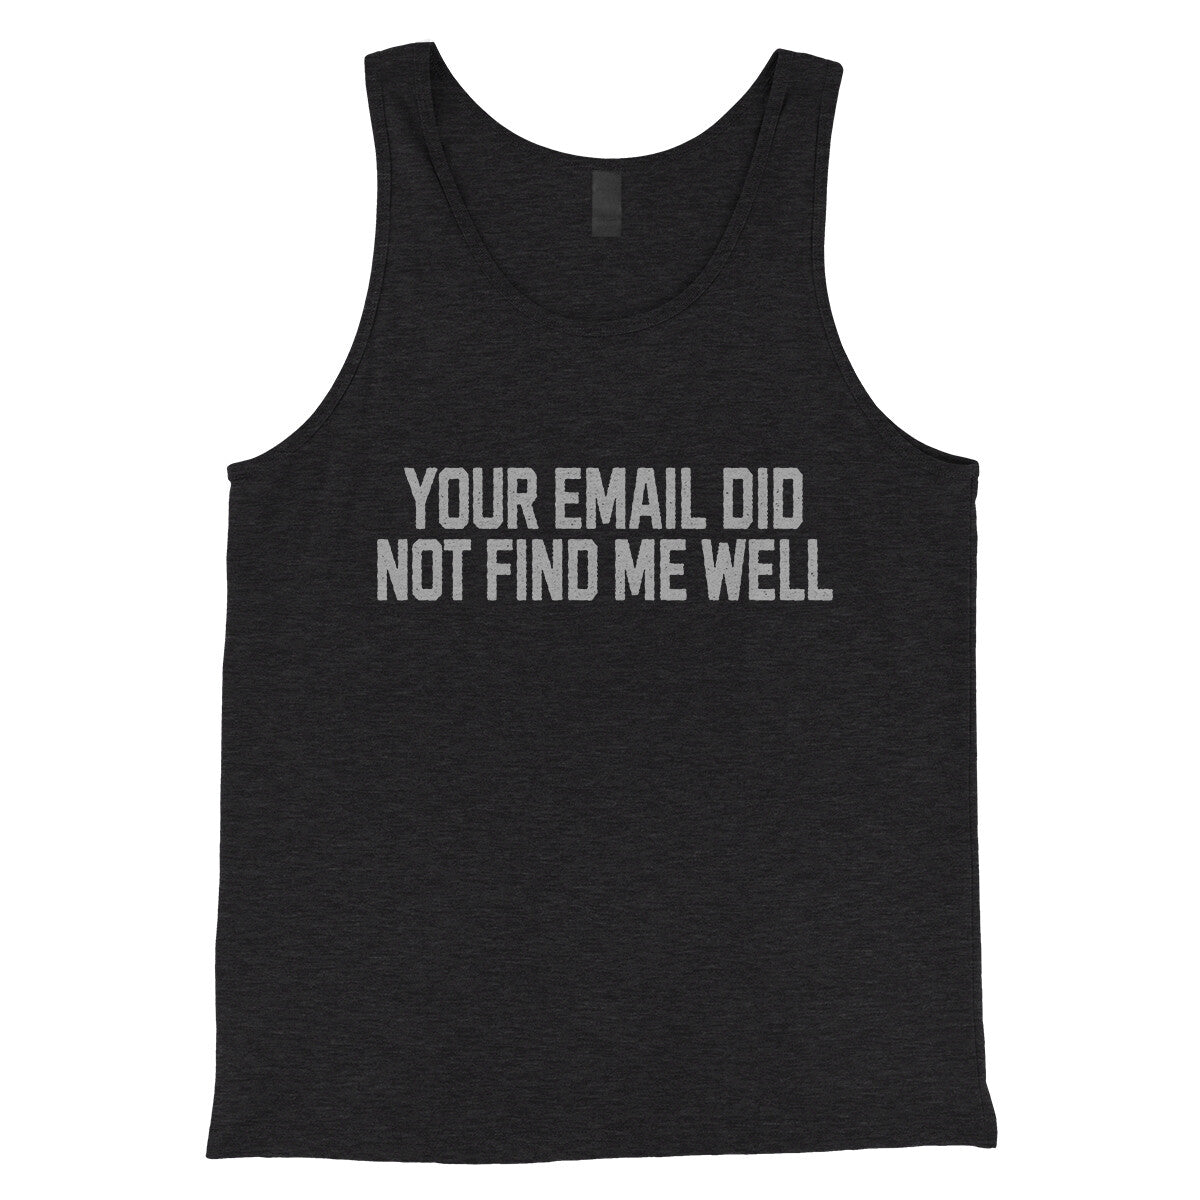 Your Email Did Not Find Me Well in Charcoal Black TriBlend Color